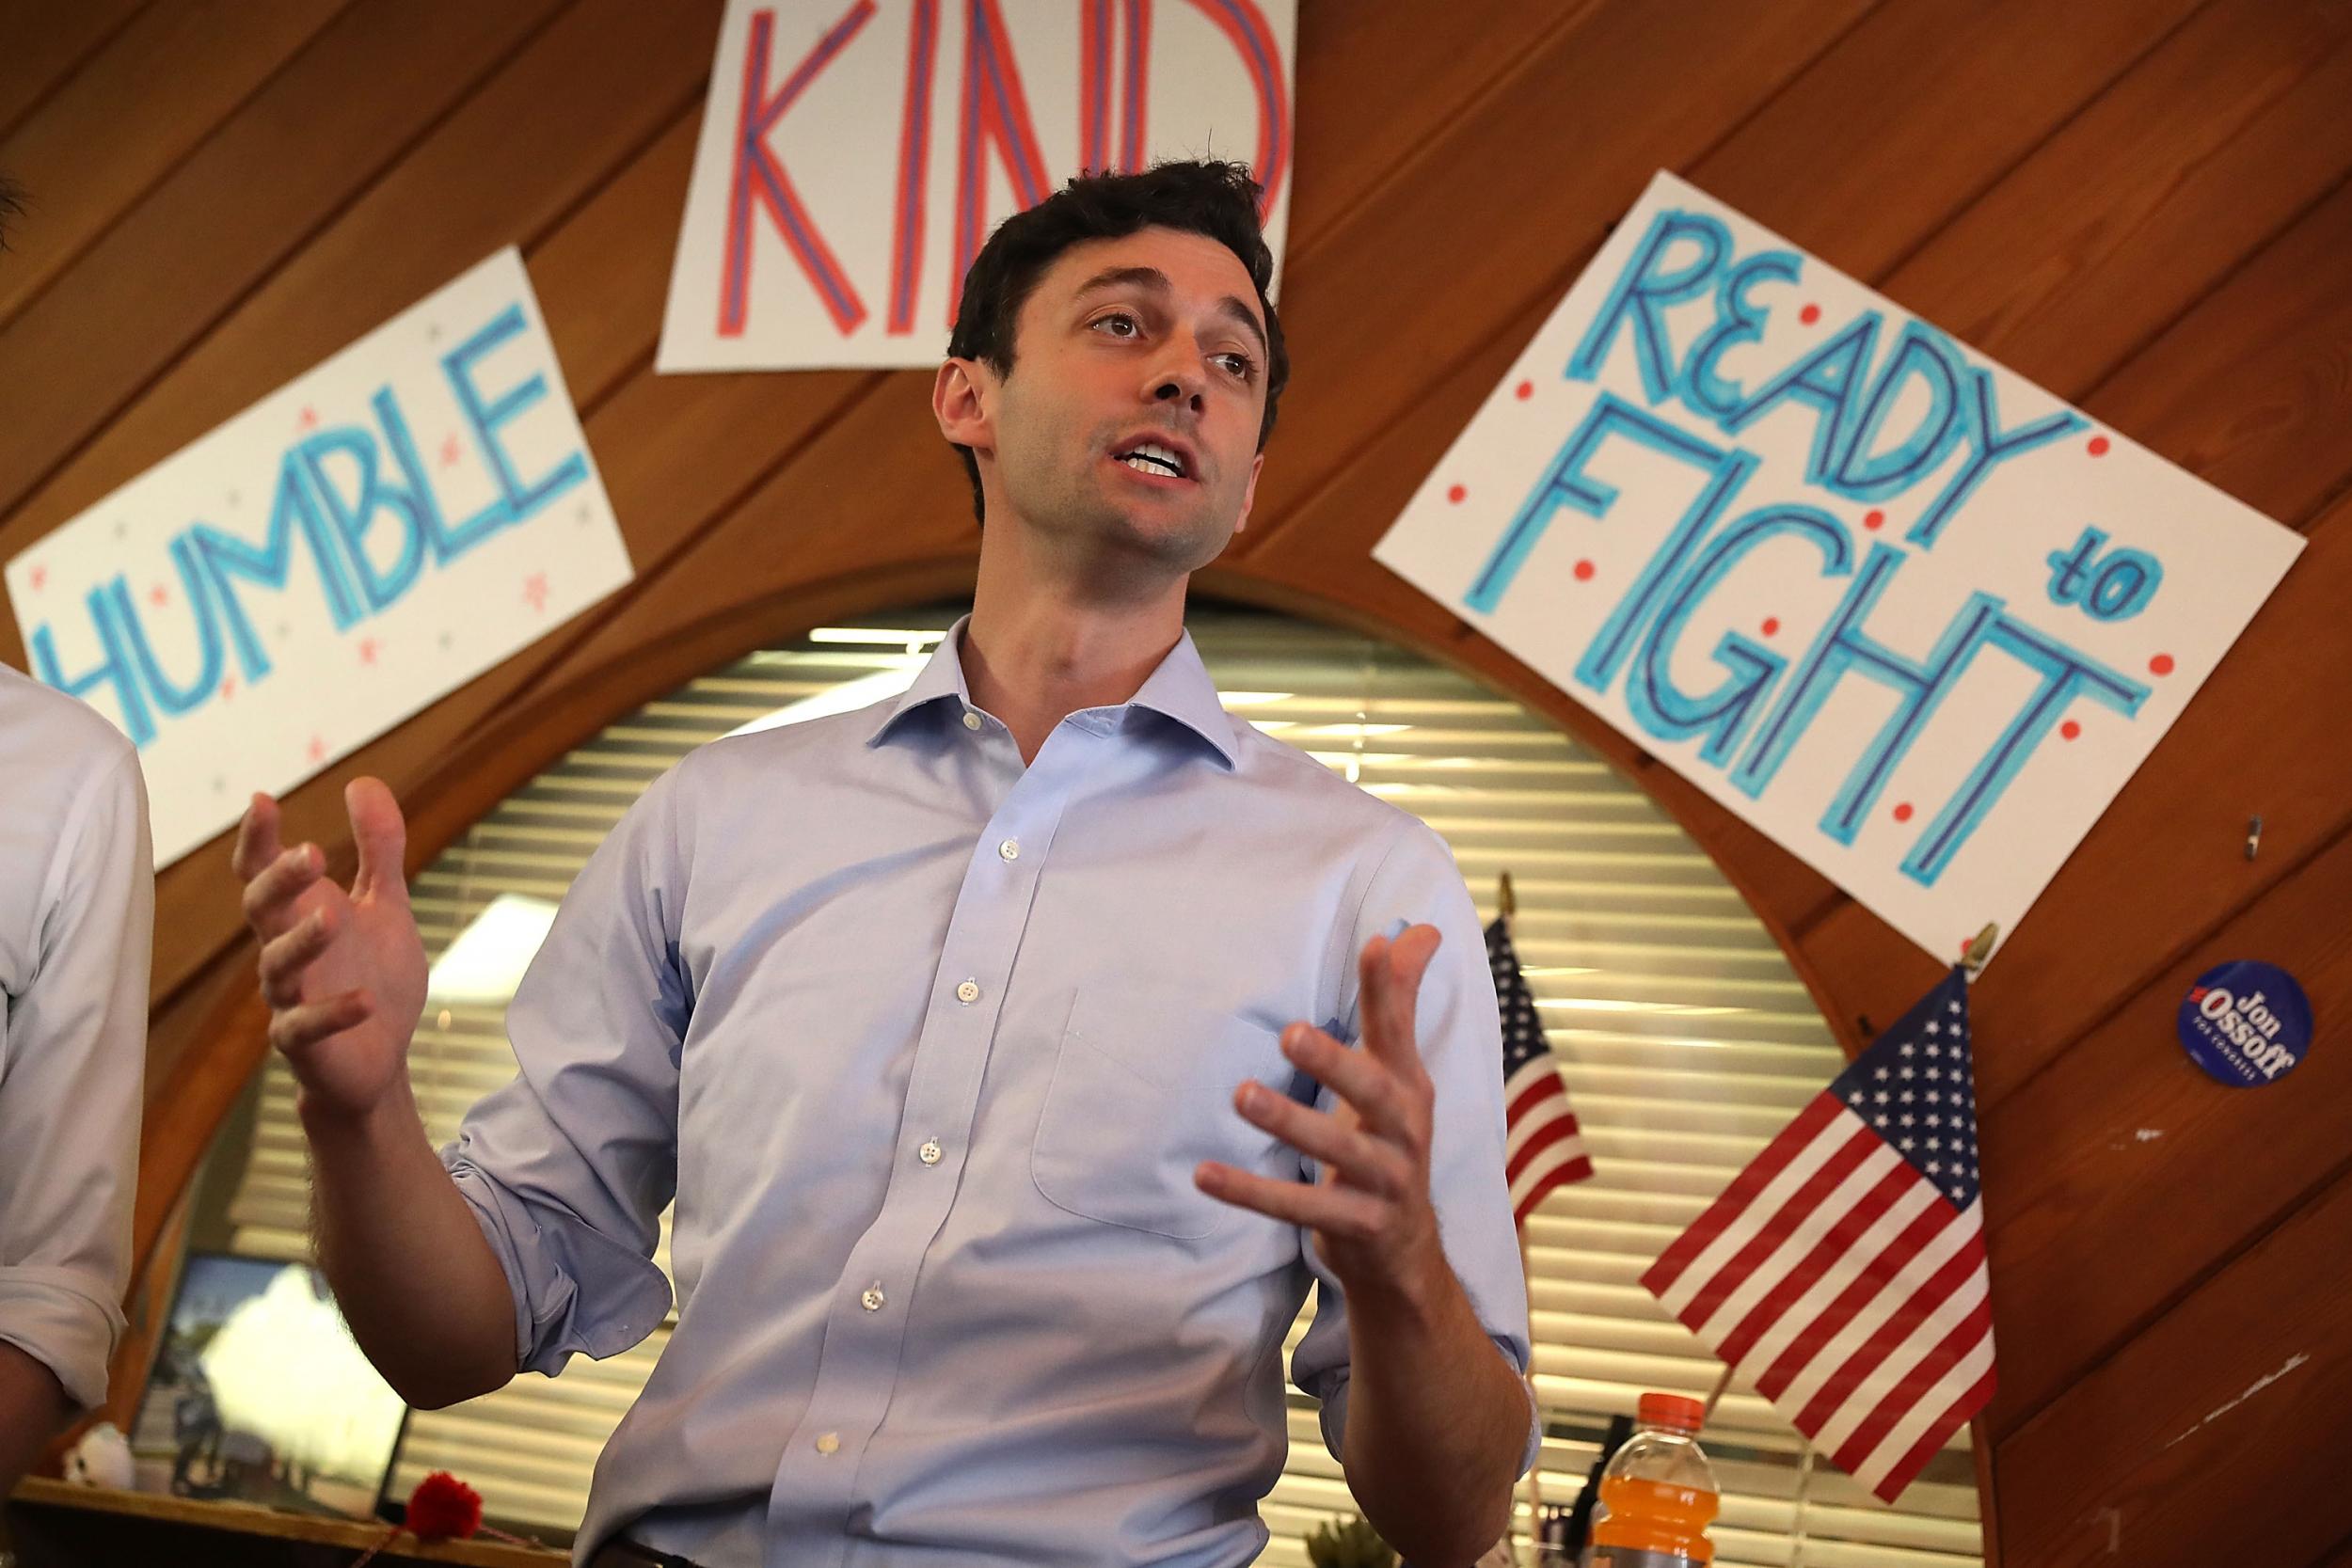 Mr Ossoff is hoping for an upset in Georgia's sixth